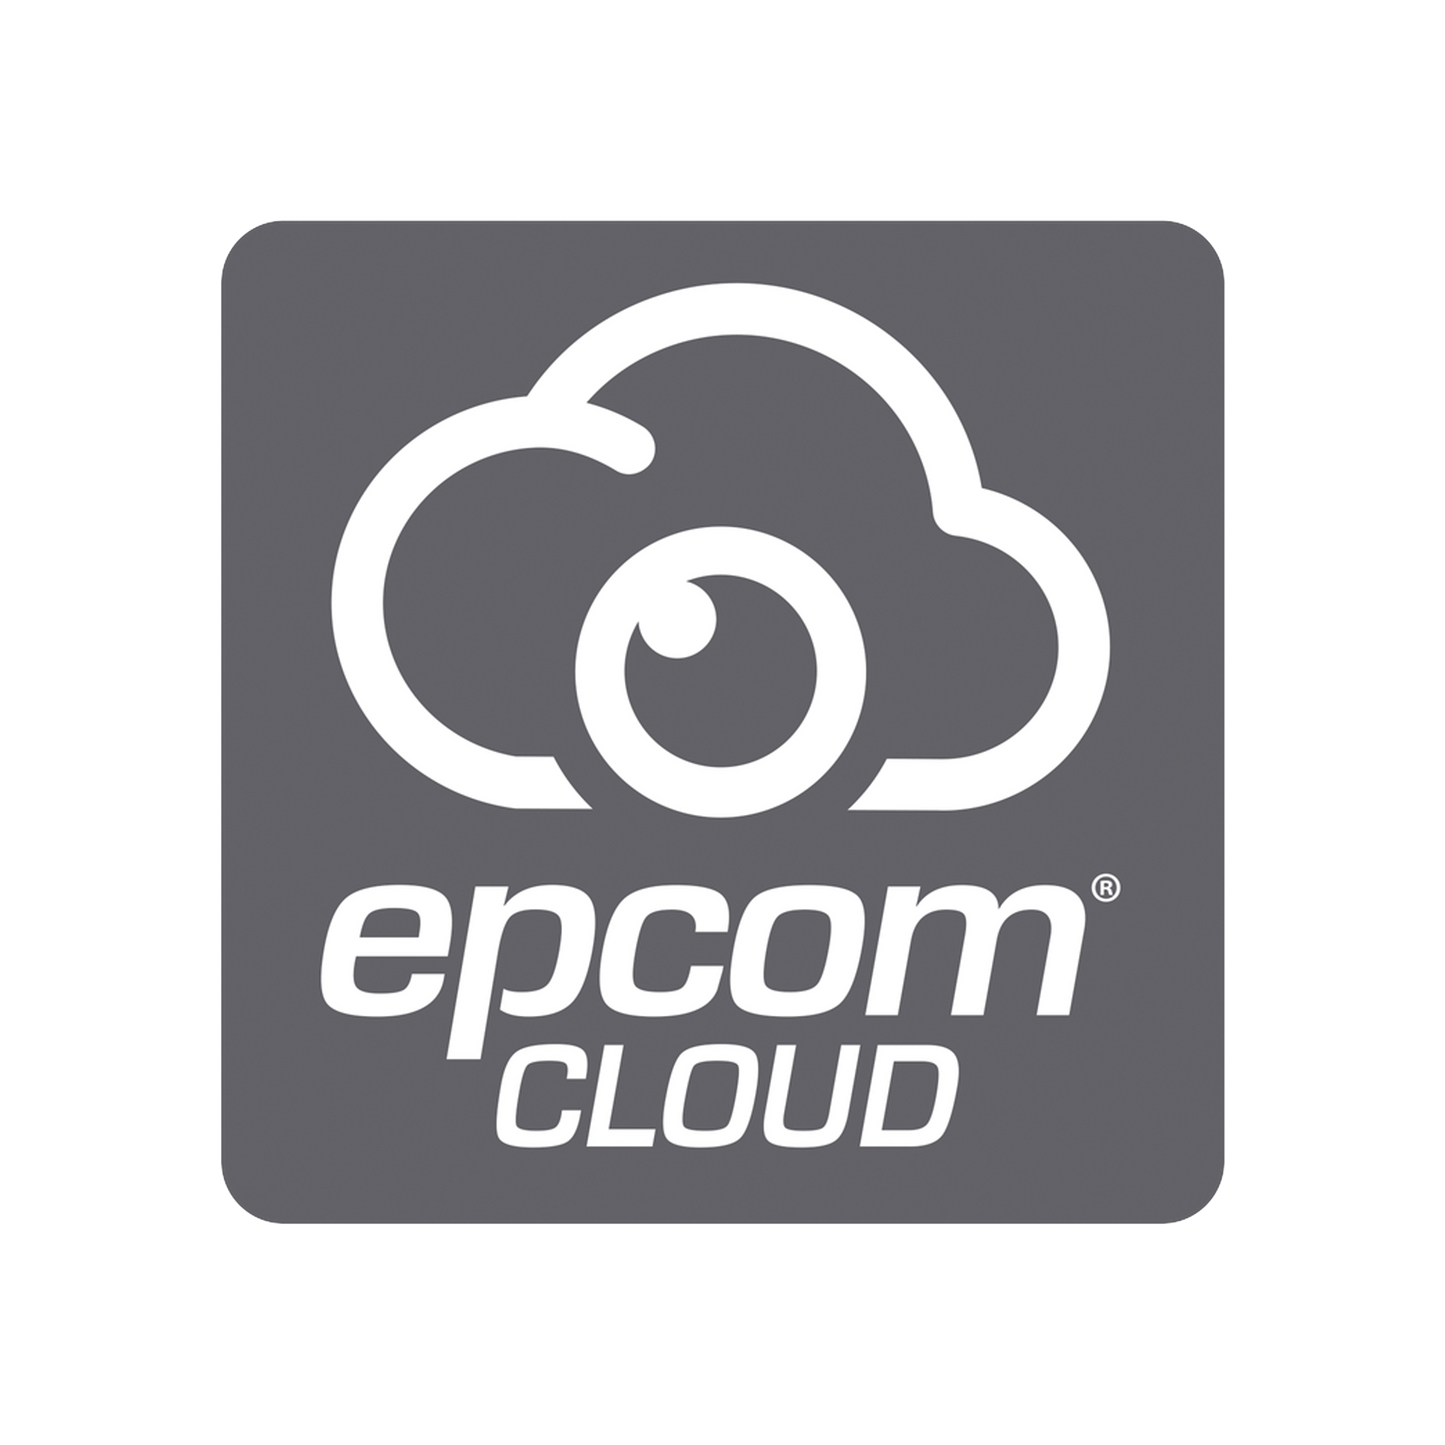 Epcom Cloud Annual Subscription / Cloud recording for 1 video channel at 8MP with 180 days retention / Continuous recording